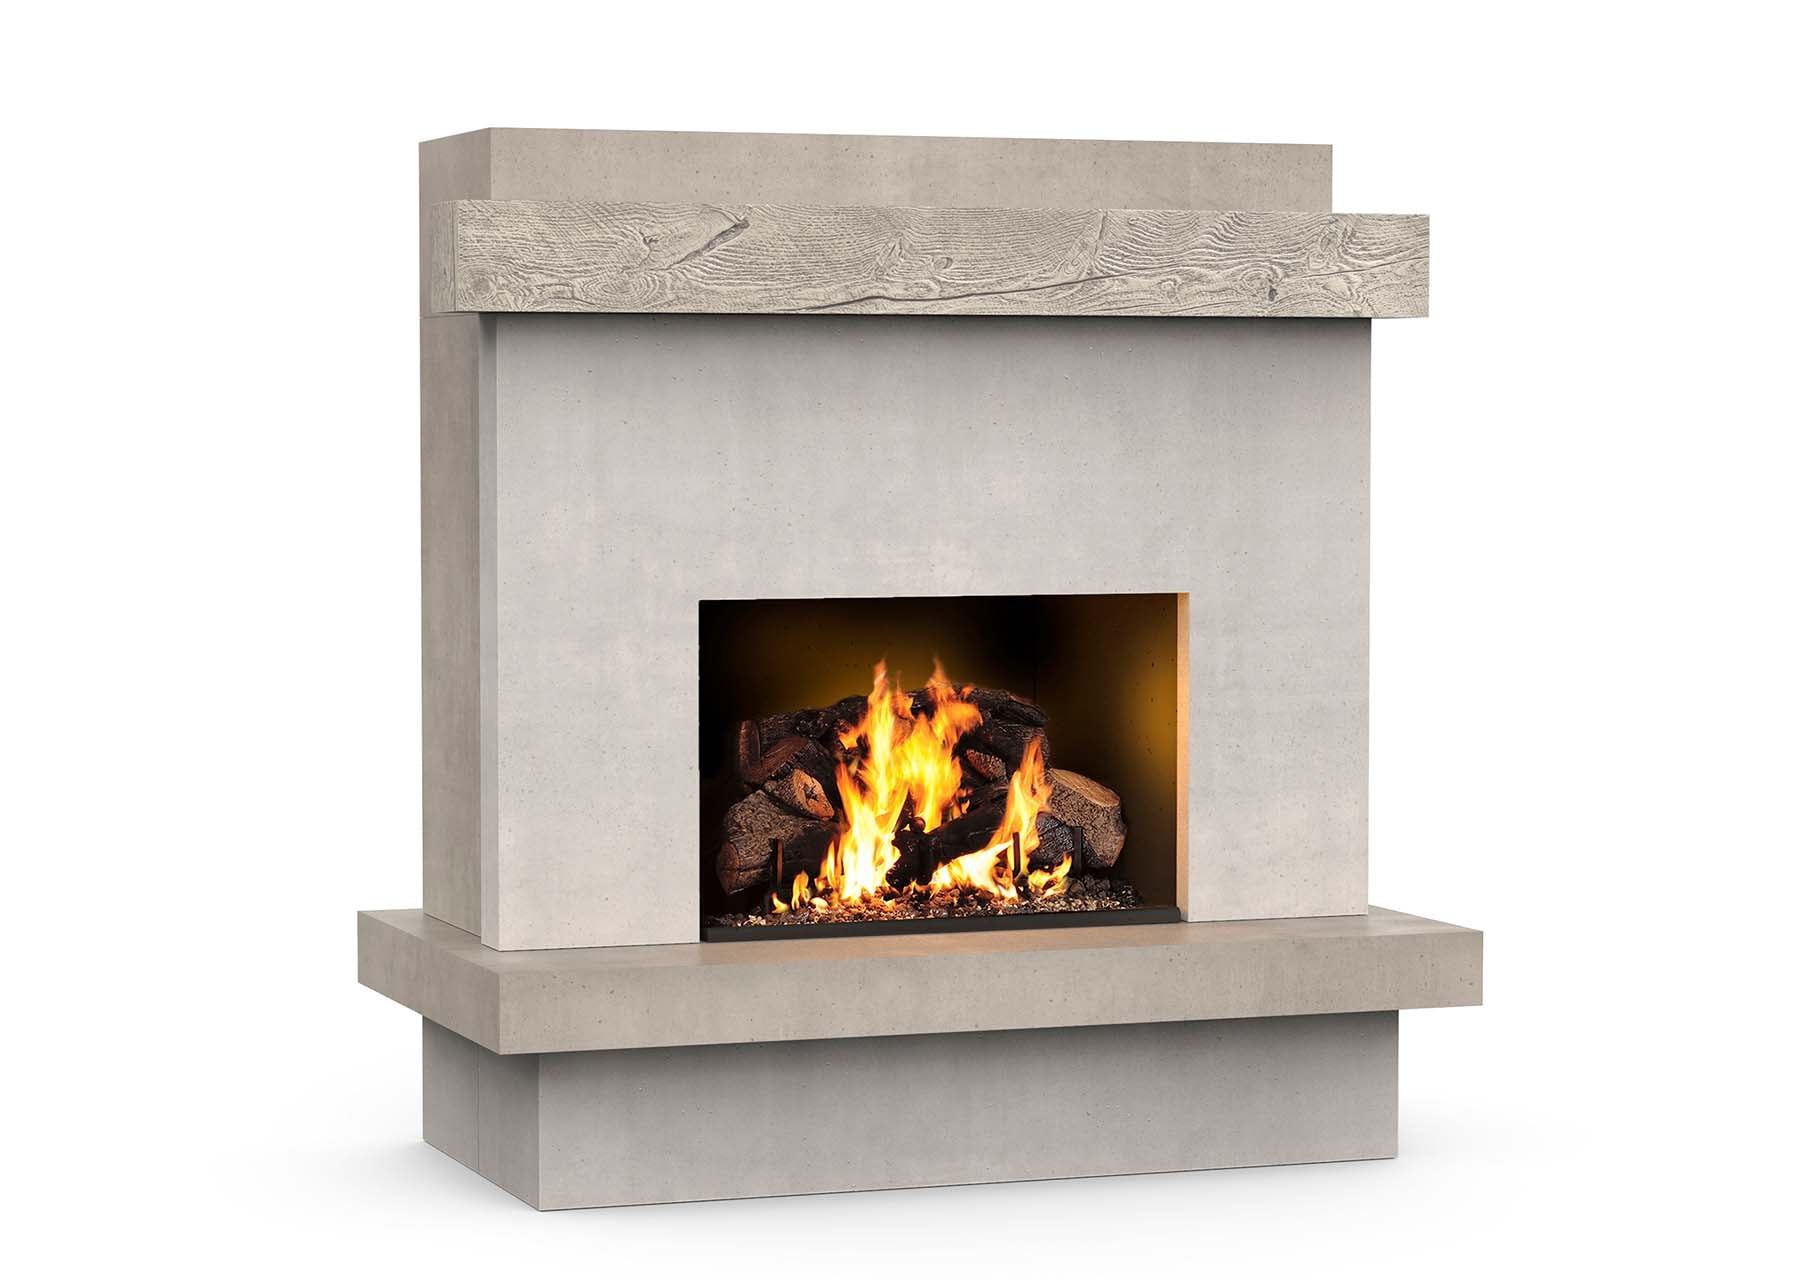 American Fyre Designs Brooklyn Smooth 68" Outdoor Gas Fireplace - Kozy Korner Fire Pits